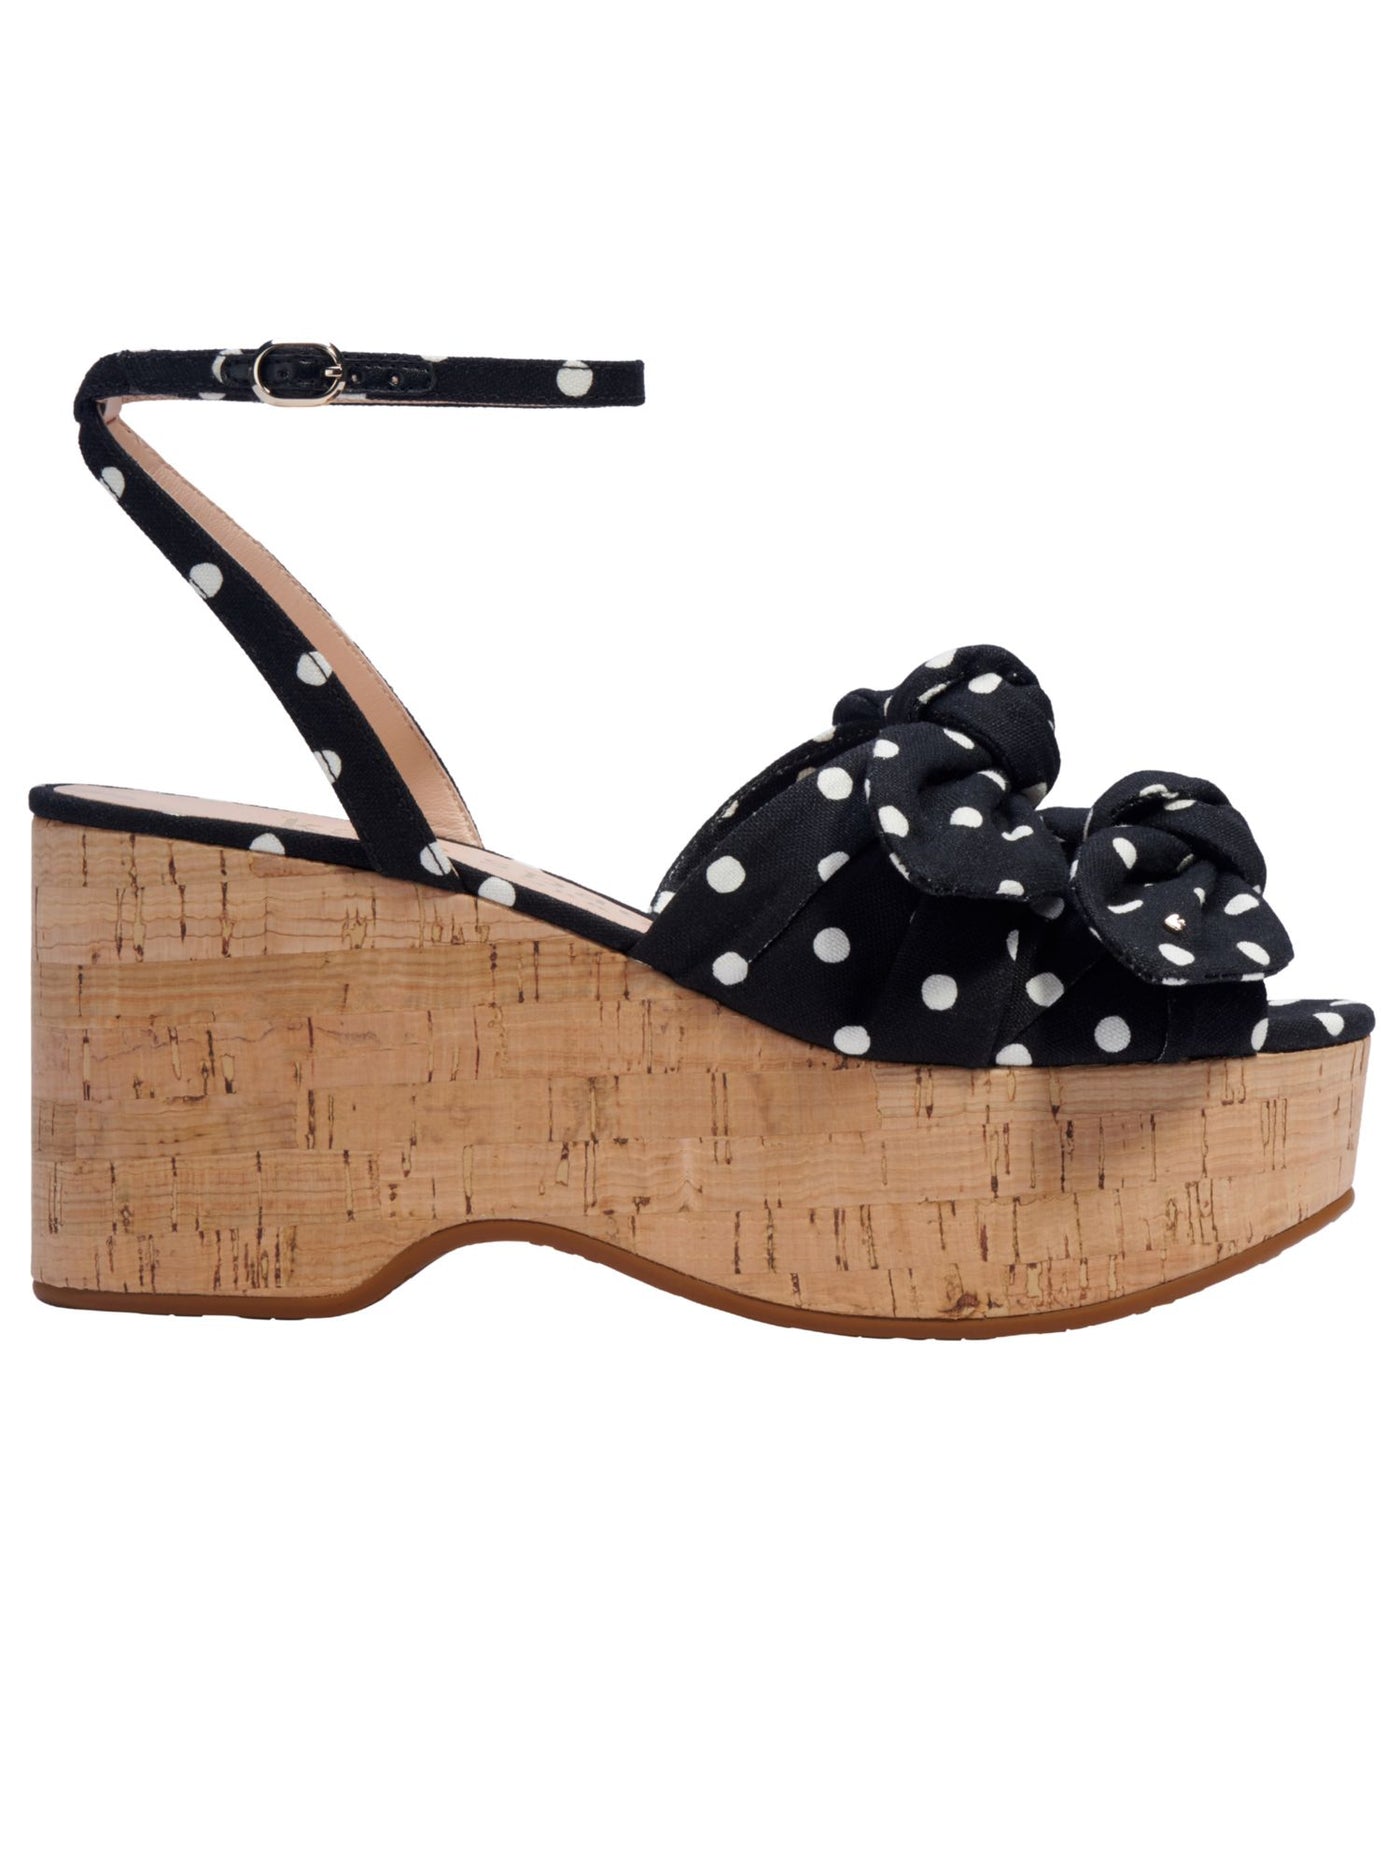 KATE SPADE NEW YORK Womens Black/French Cream Polka Dot Double Bow Cork Ankle Strap Cushioned Julep Round Toe Wedge Buckle Dress Sandals Shoes 7.5 B